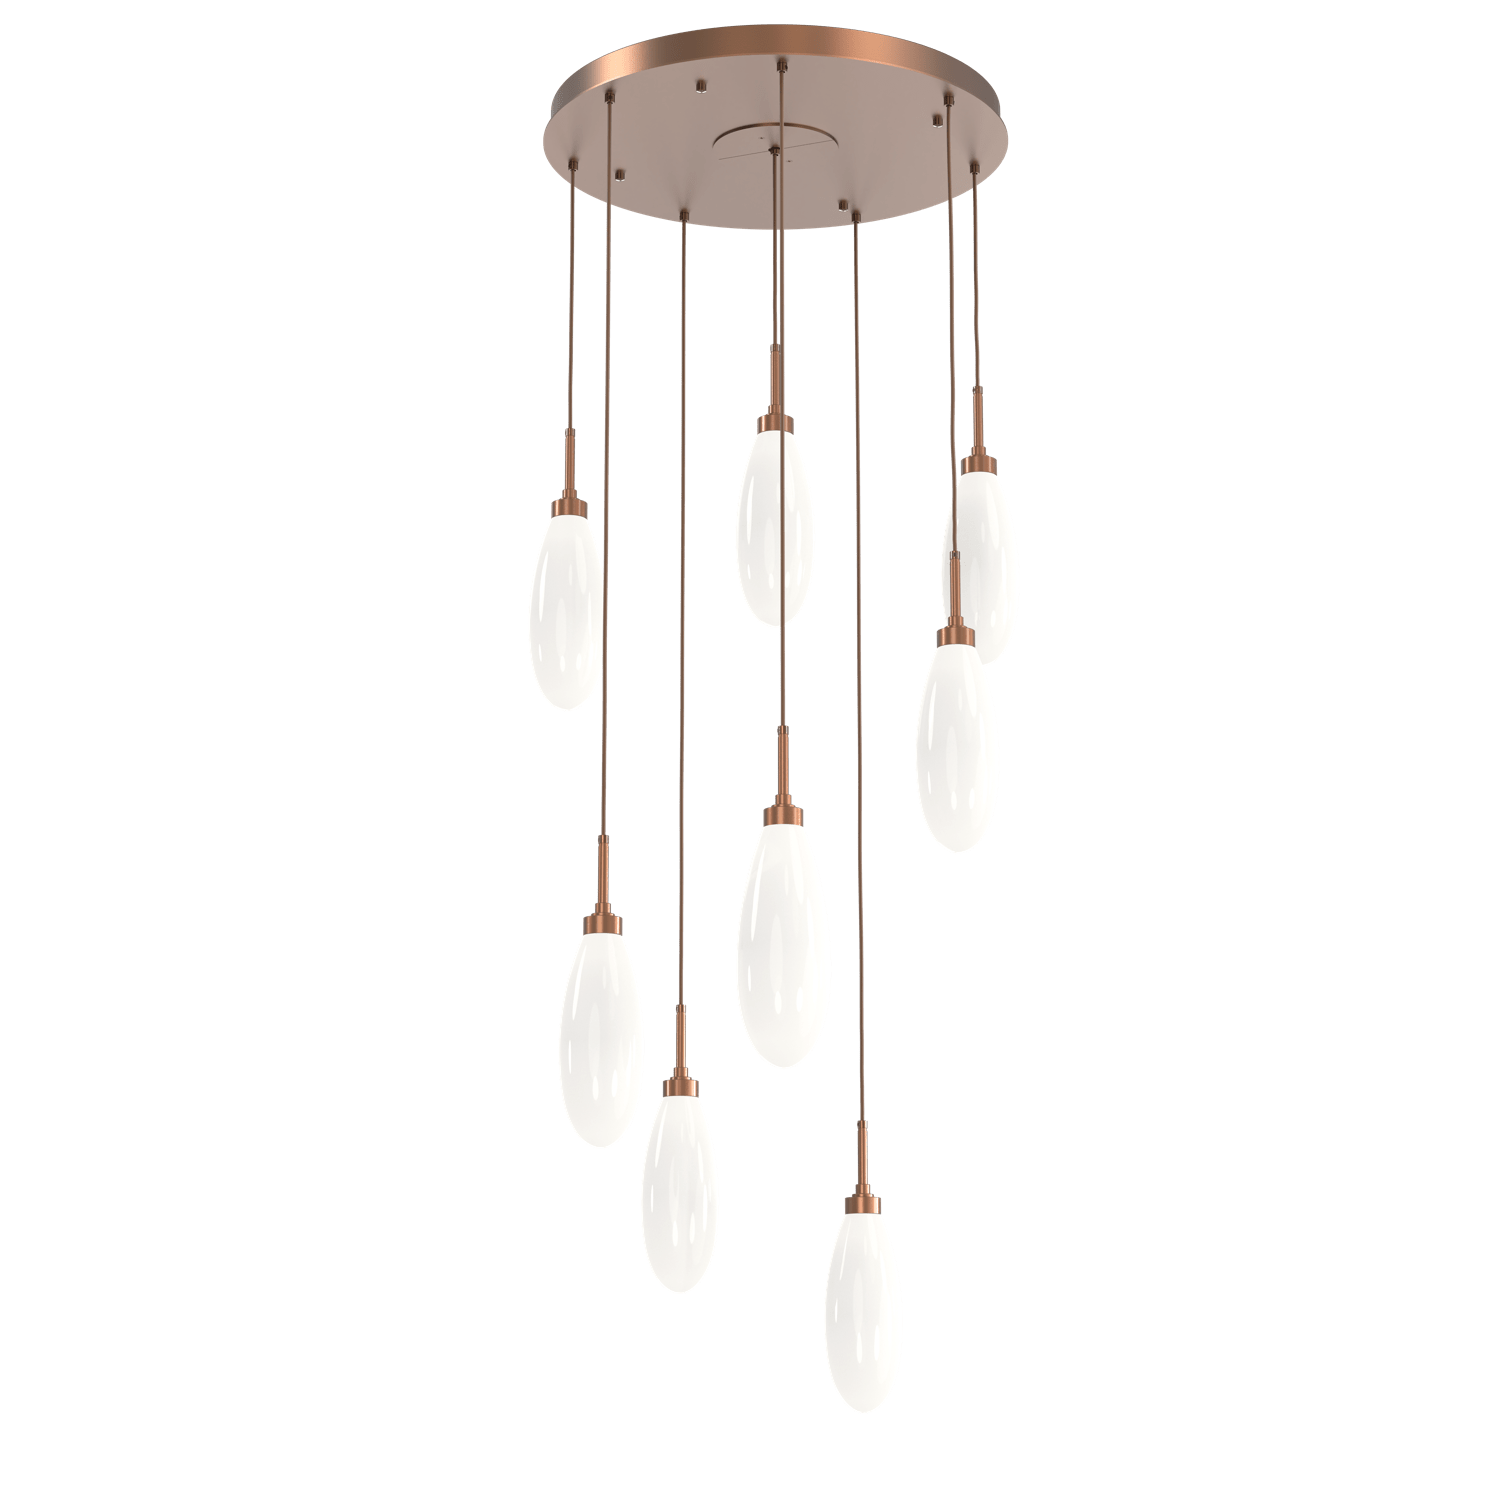 CHB0071-08-BB-WL-LL-Hammerton-Studio-Fiori-8-light-round-pendant-chandelier-with-burnished-bronze-finish-and-opal-white-glass-shades-and-LED-lamping